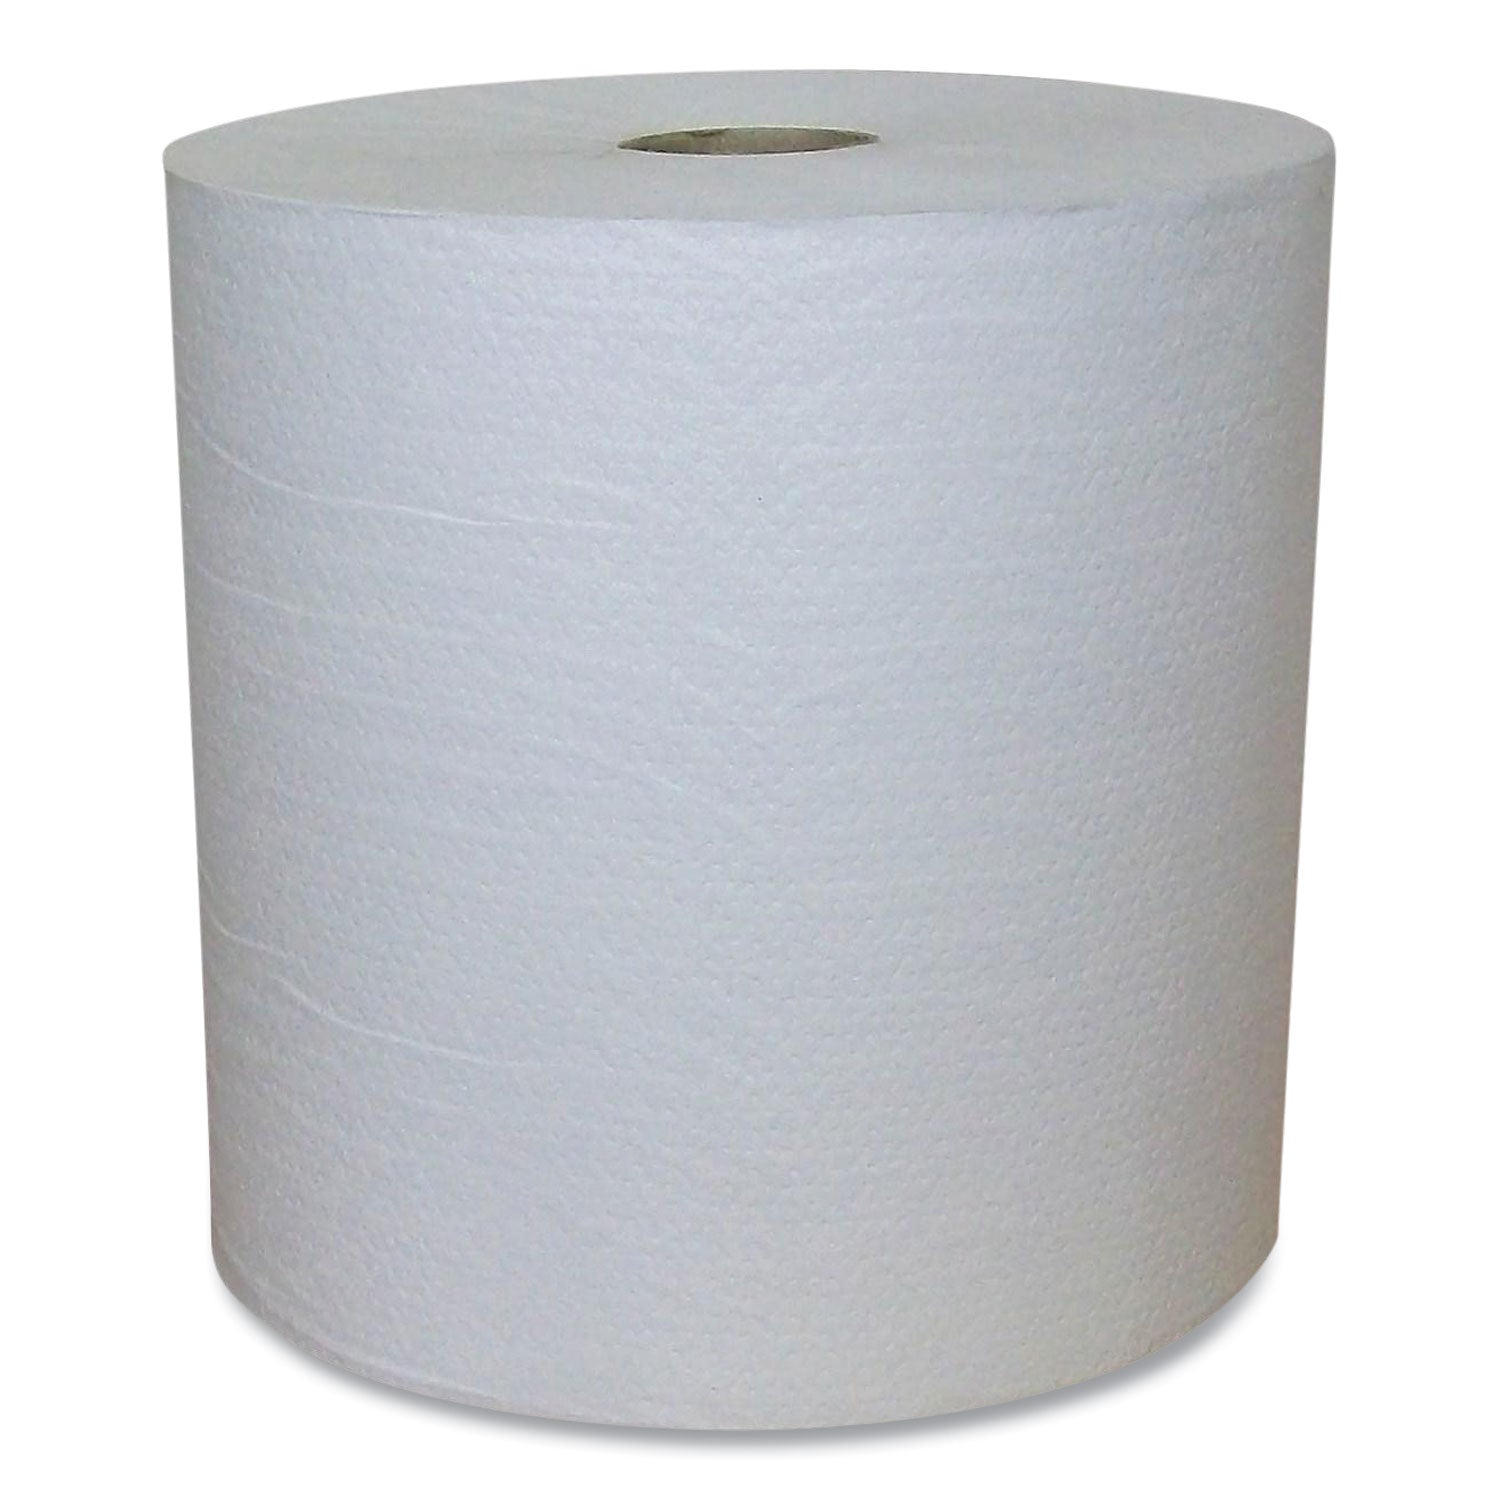 recycled-hardwound-paper-towels-1-ply-788-x-800-ft-18-core-white-6-rolls-carton_apaew80166 - 1